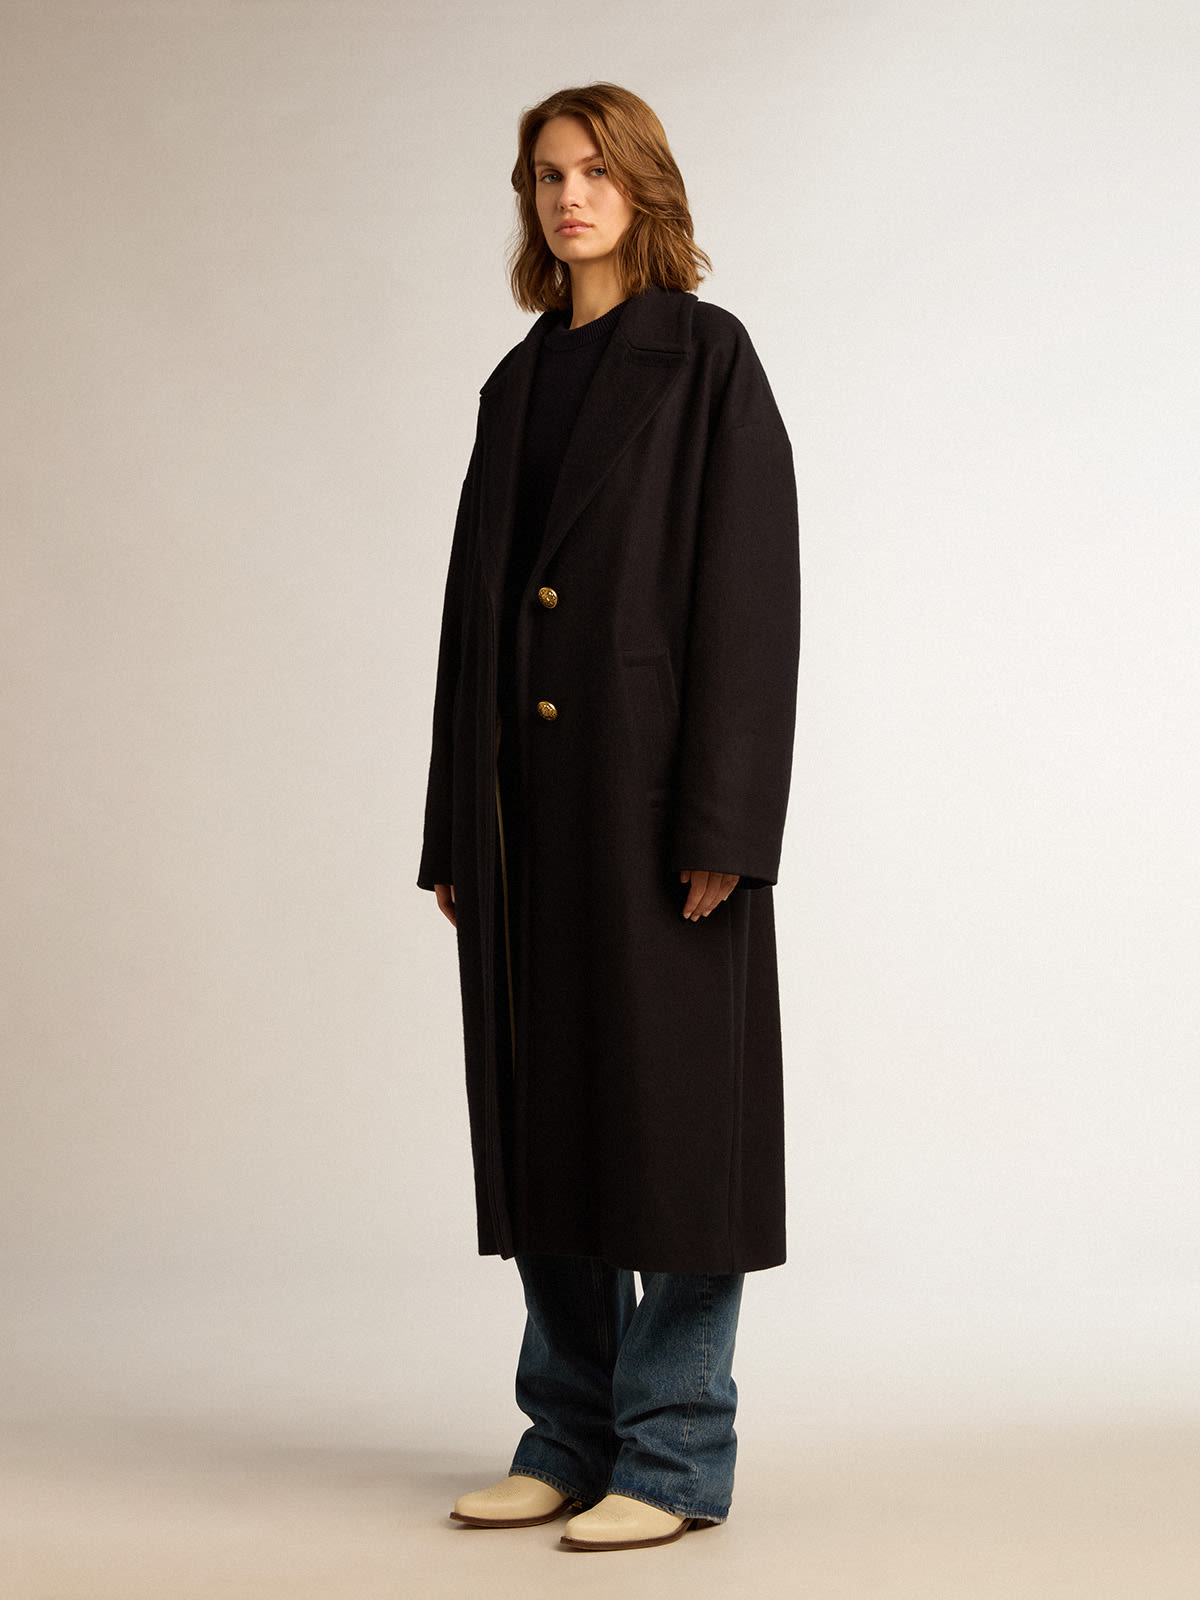 Golden Goose - Single-breasted cocoon coat in dark blue wool with gold-colored buttons in 